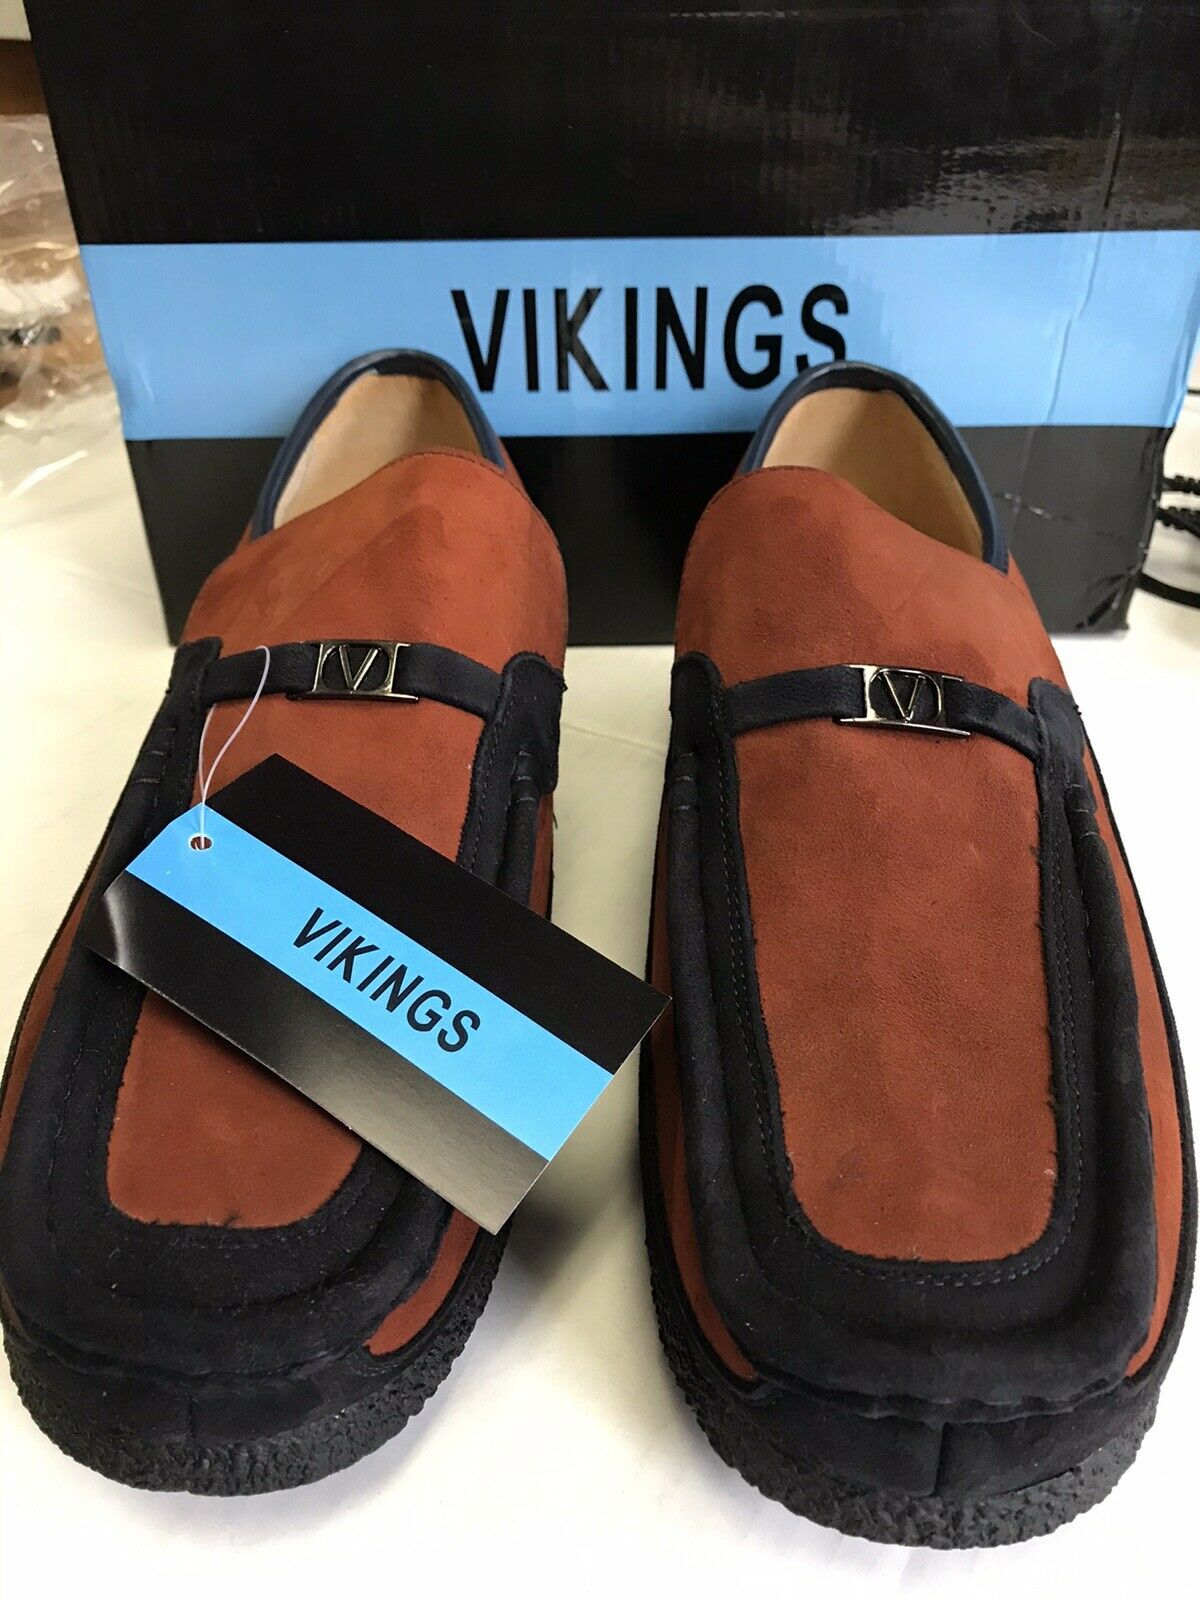 Viking Comfort Suede/Leather Men Shoes Size 11